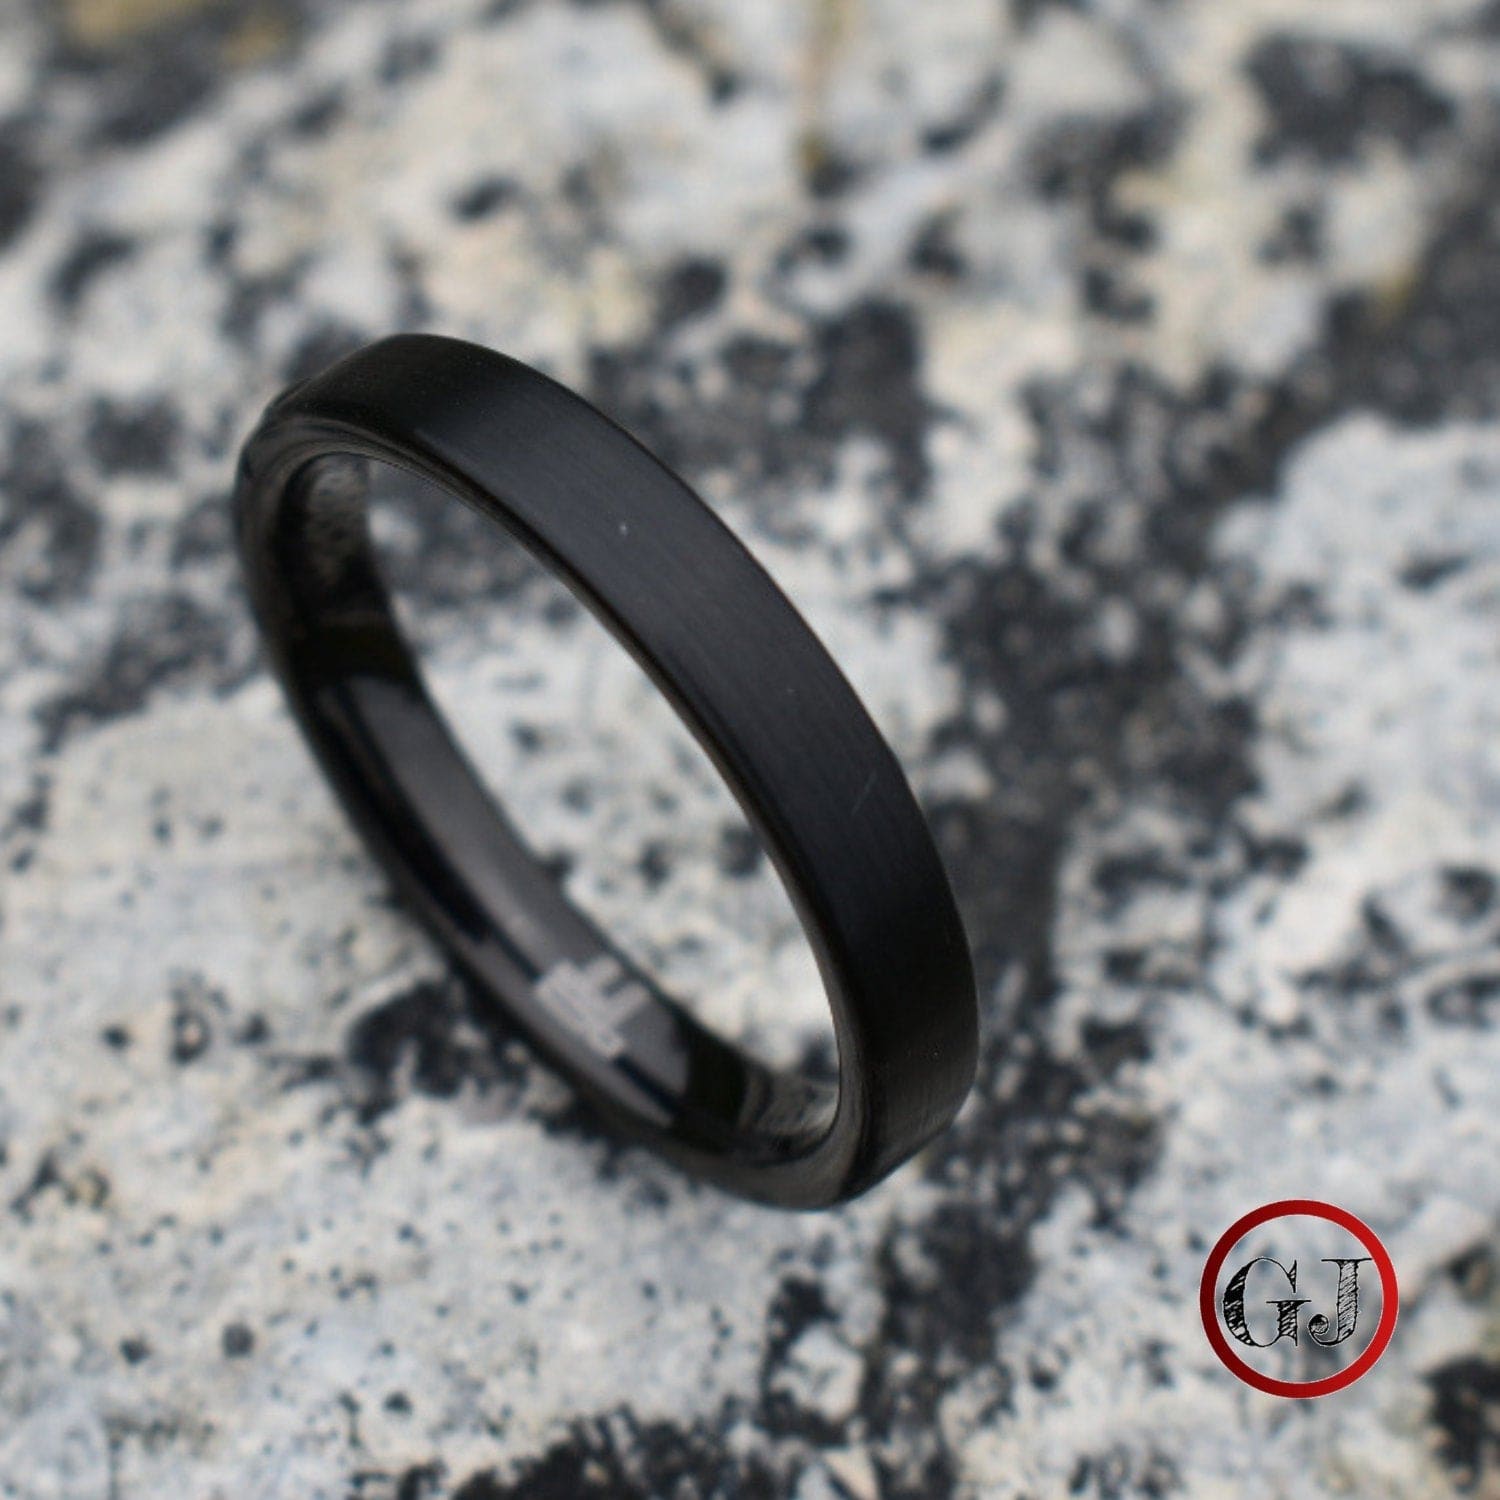 RASORET Tungsten Carbide Ring in Comfort Fit and Satin Finish